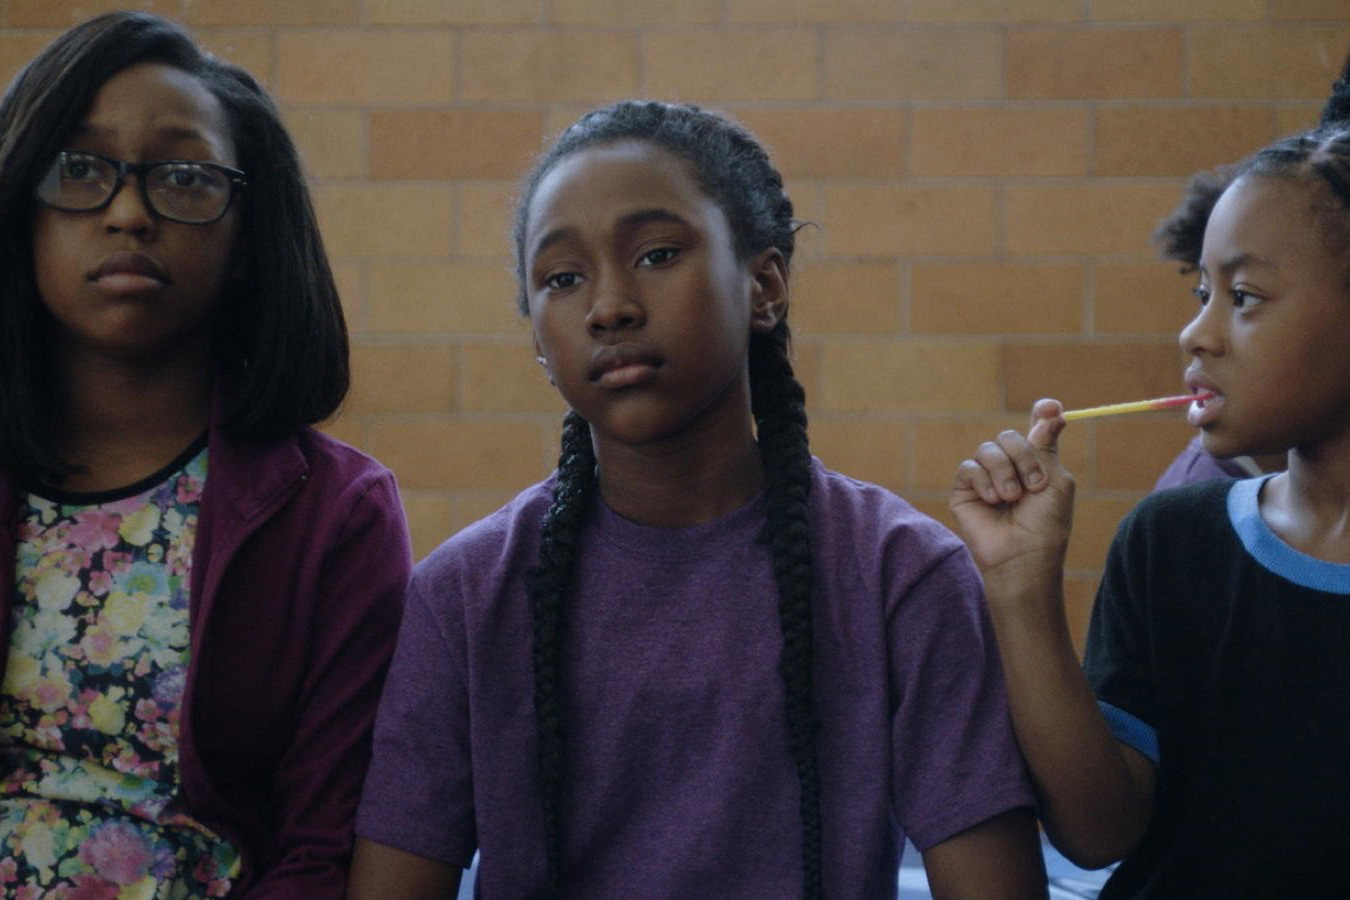 Visually and Sonically, ‘The Fits’ Is a Wonderfully Weird Debut